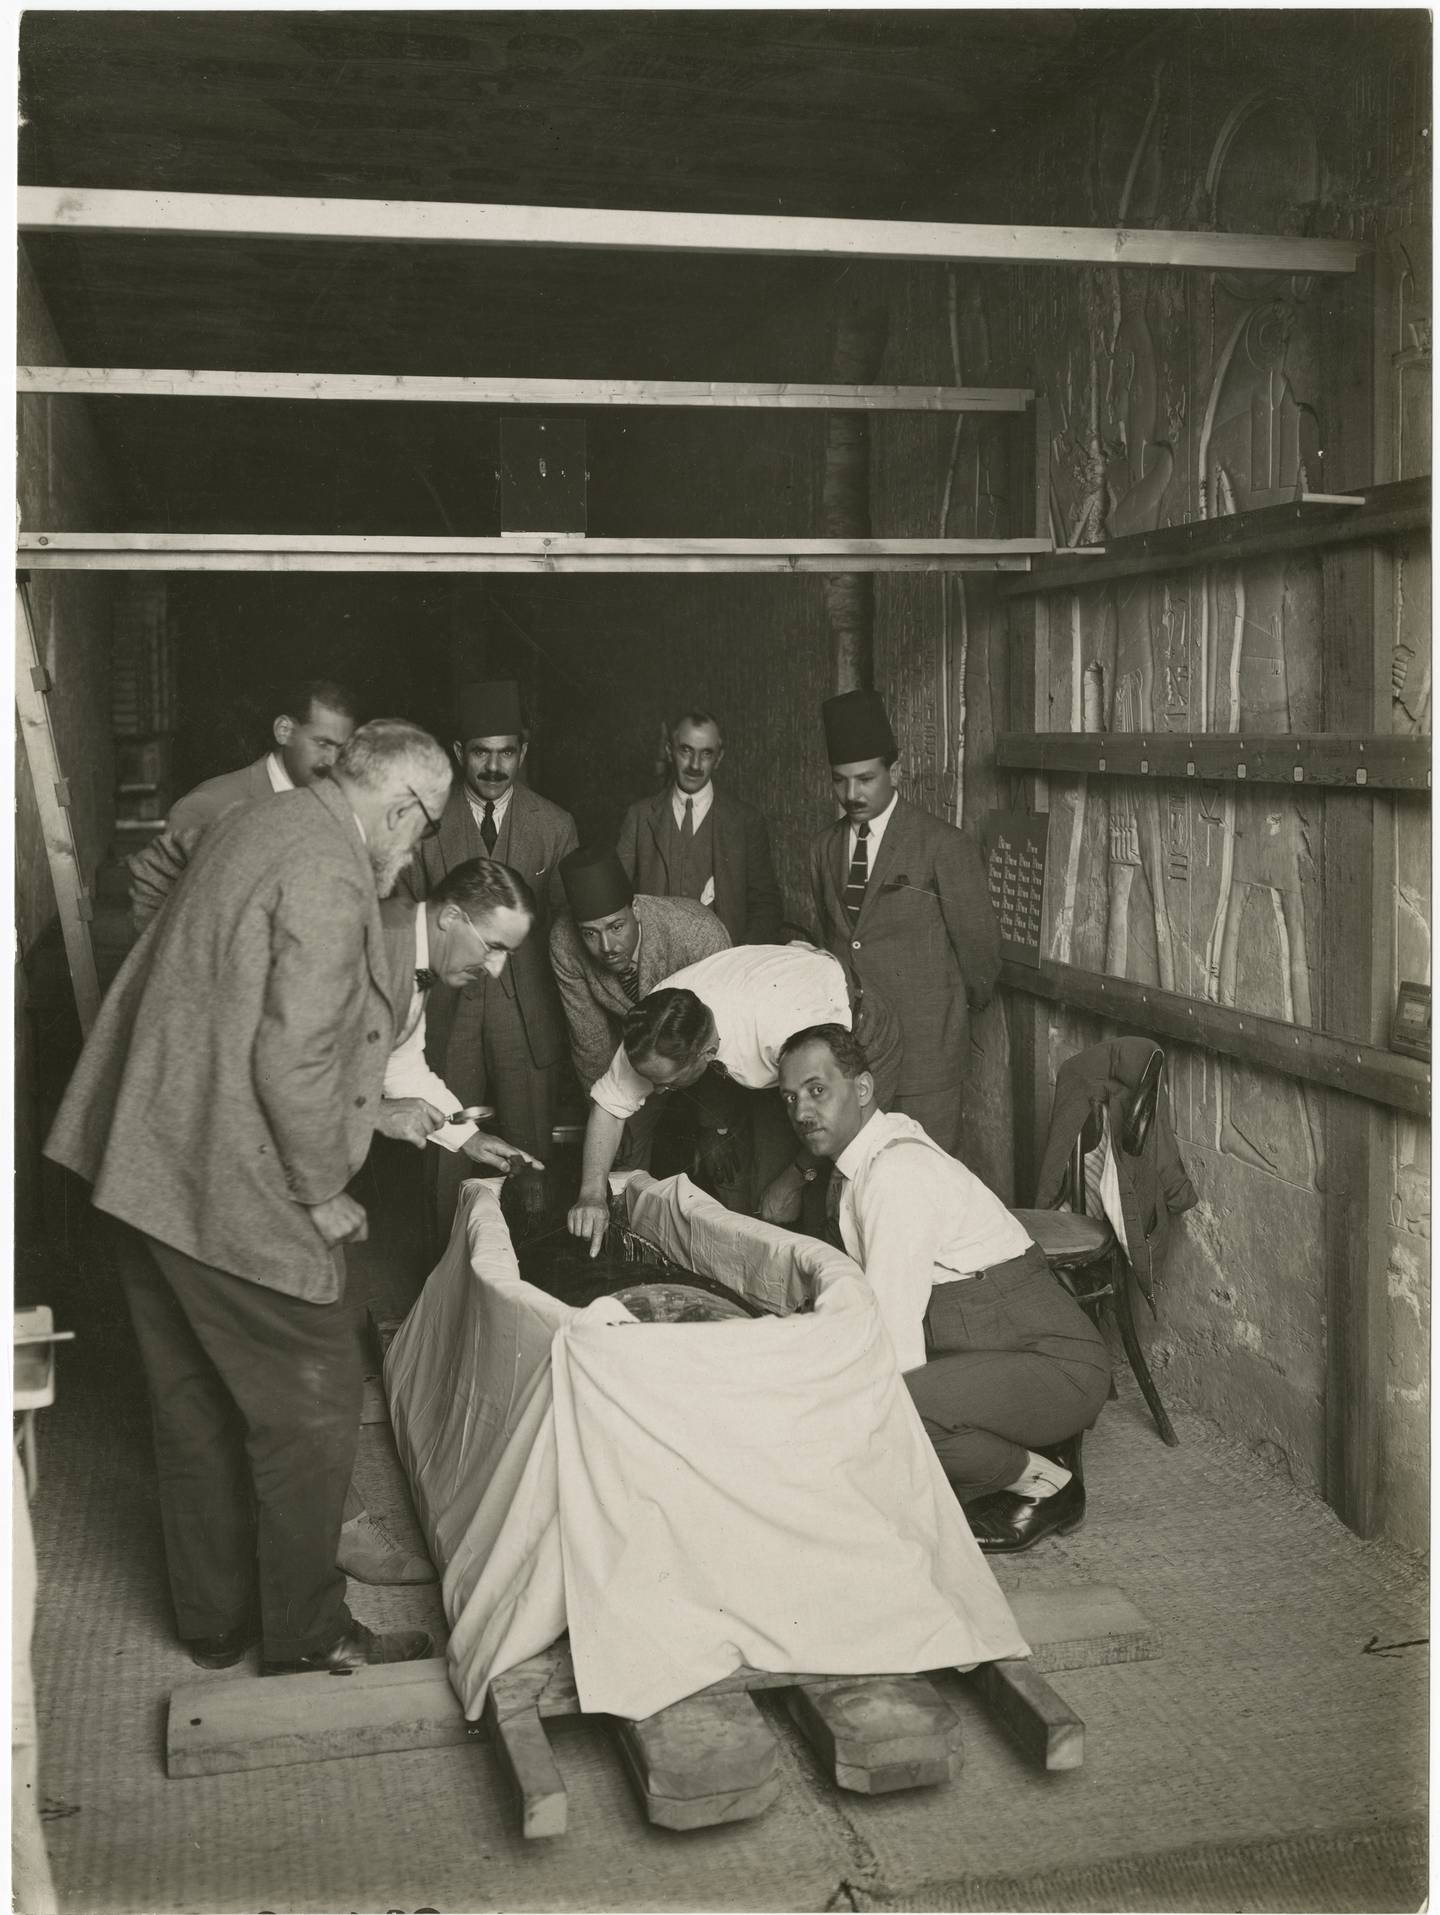 The official committee observing the first incision. Photo: The Bodleian Libraries/University of Oxford